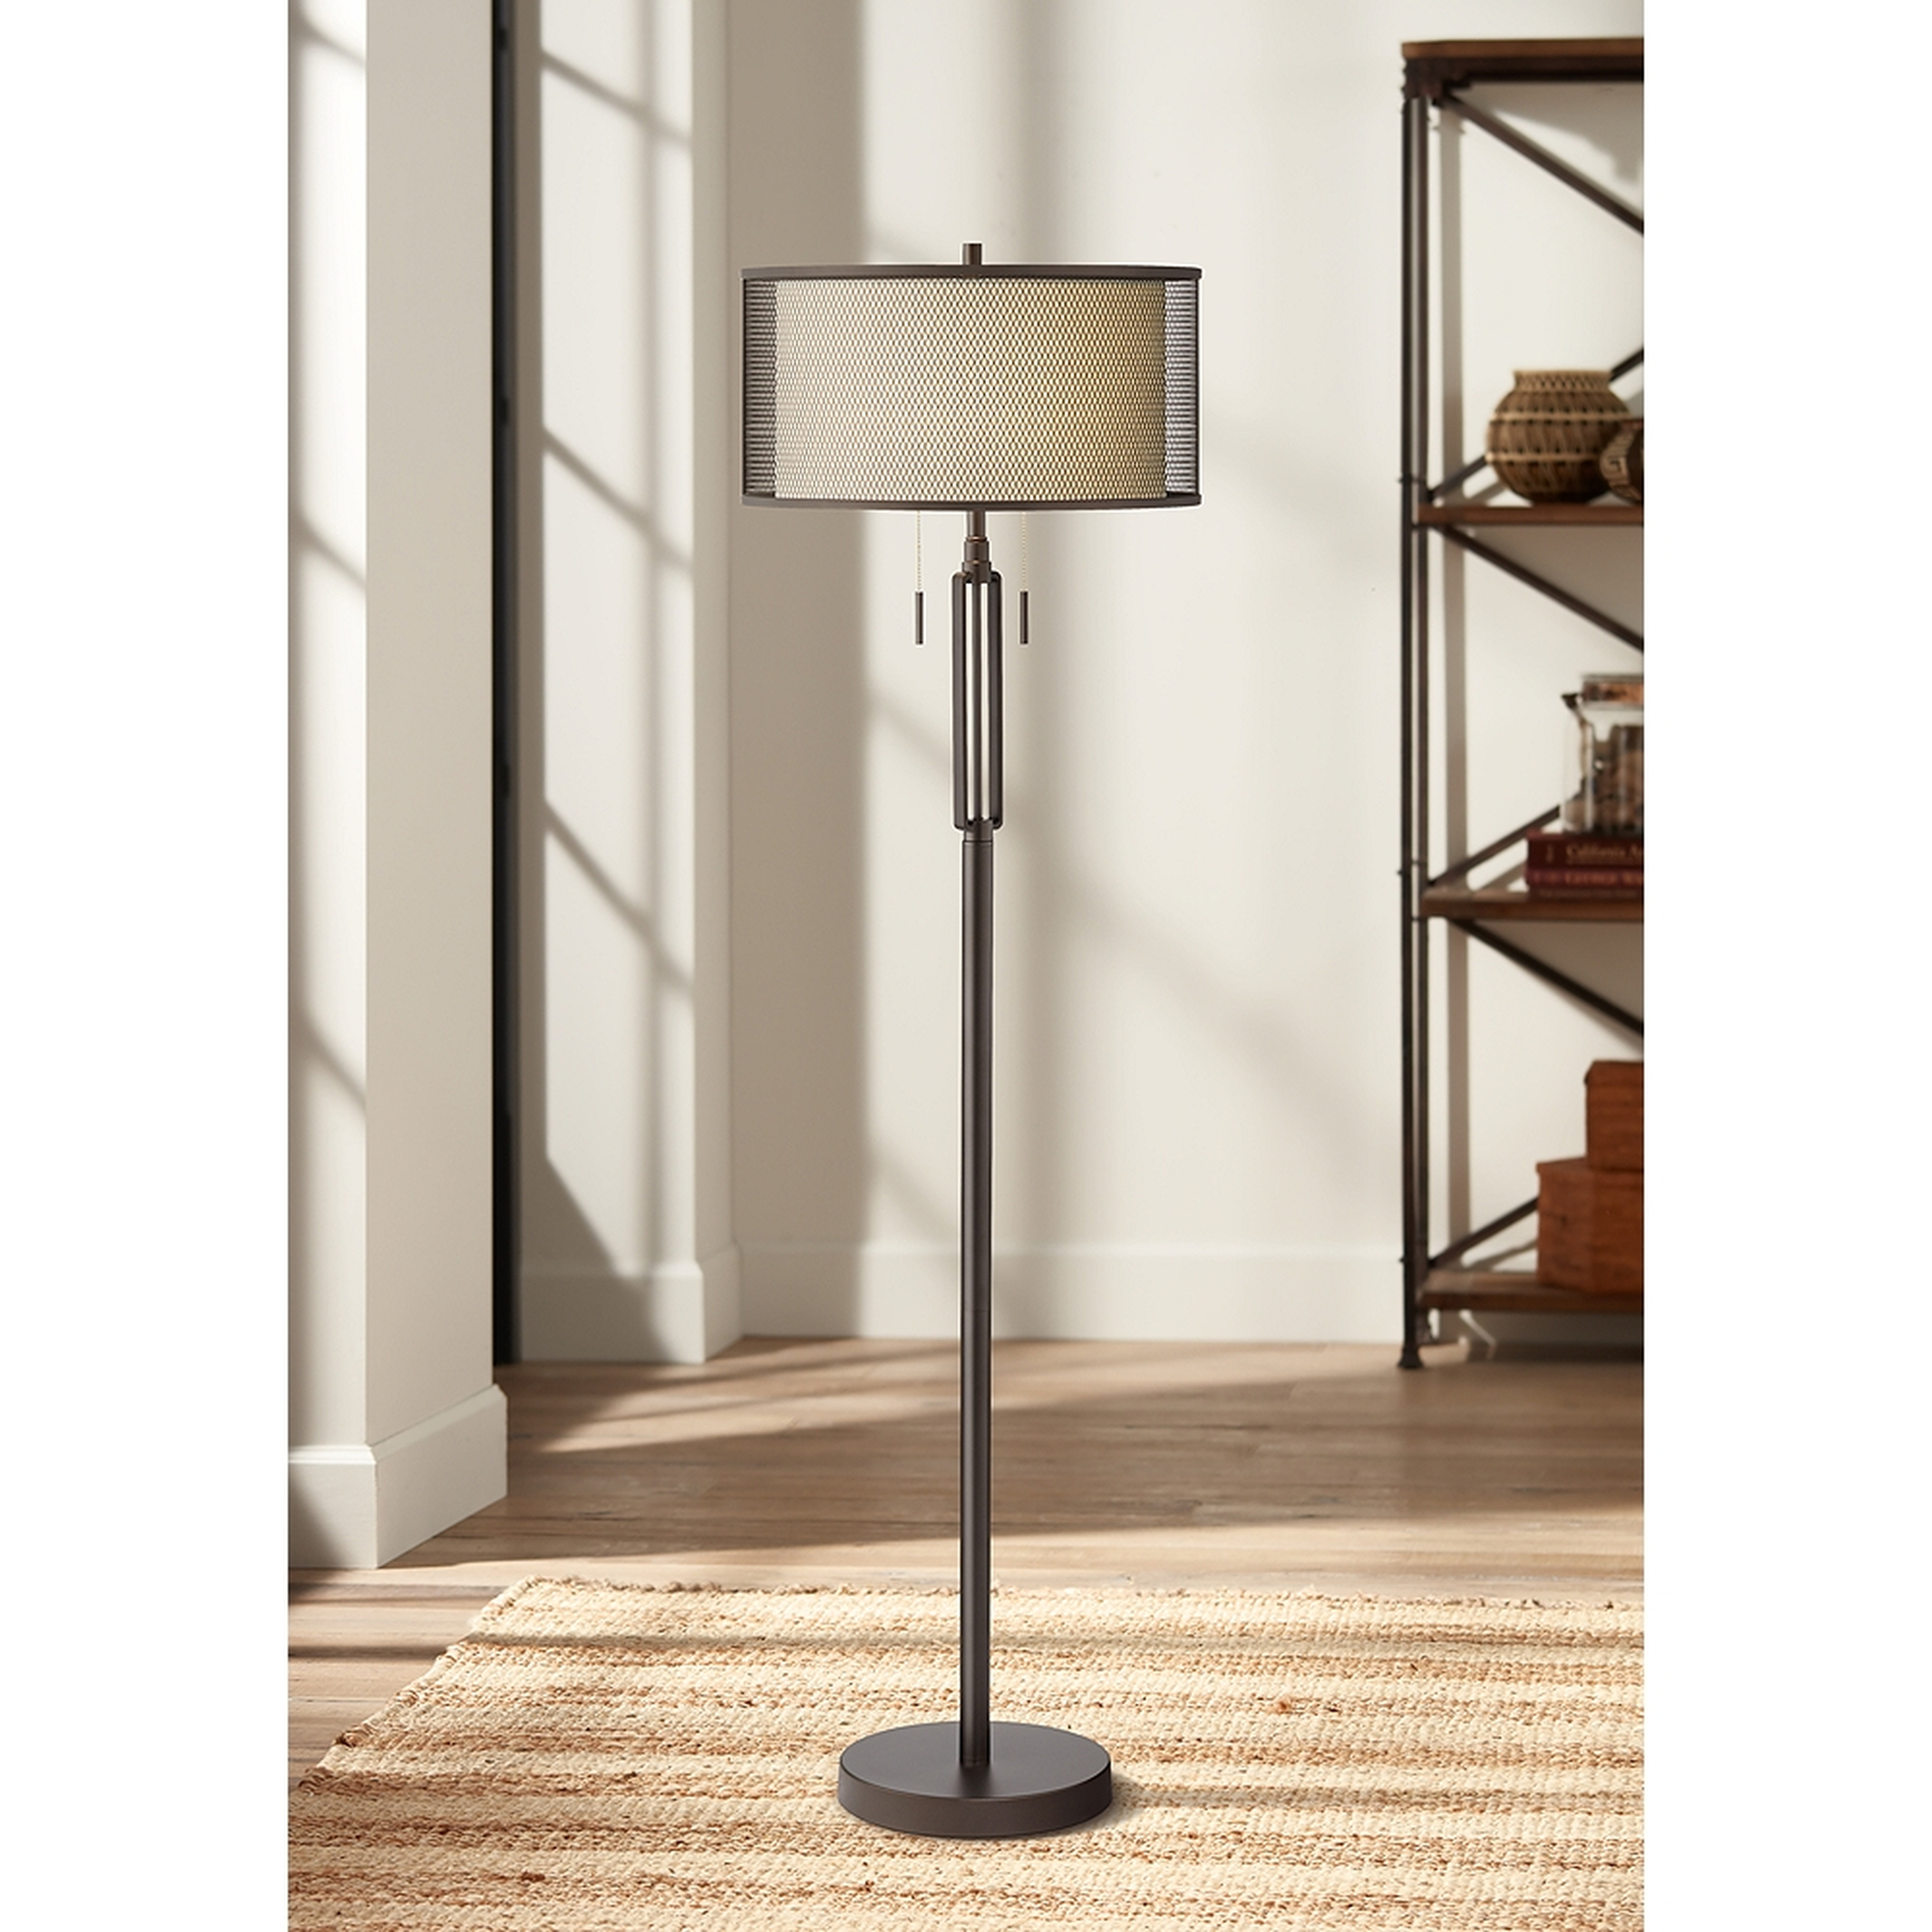 Turnbuckle Bronze Floor Lamp with Double Shade - Style # 16W00 - Lamps Plus